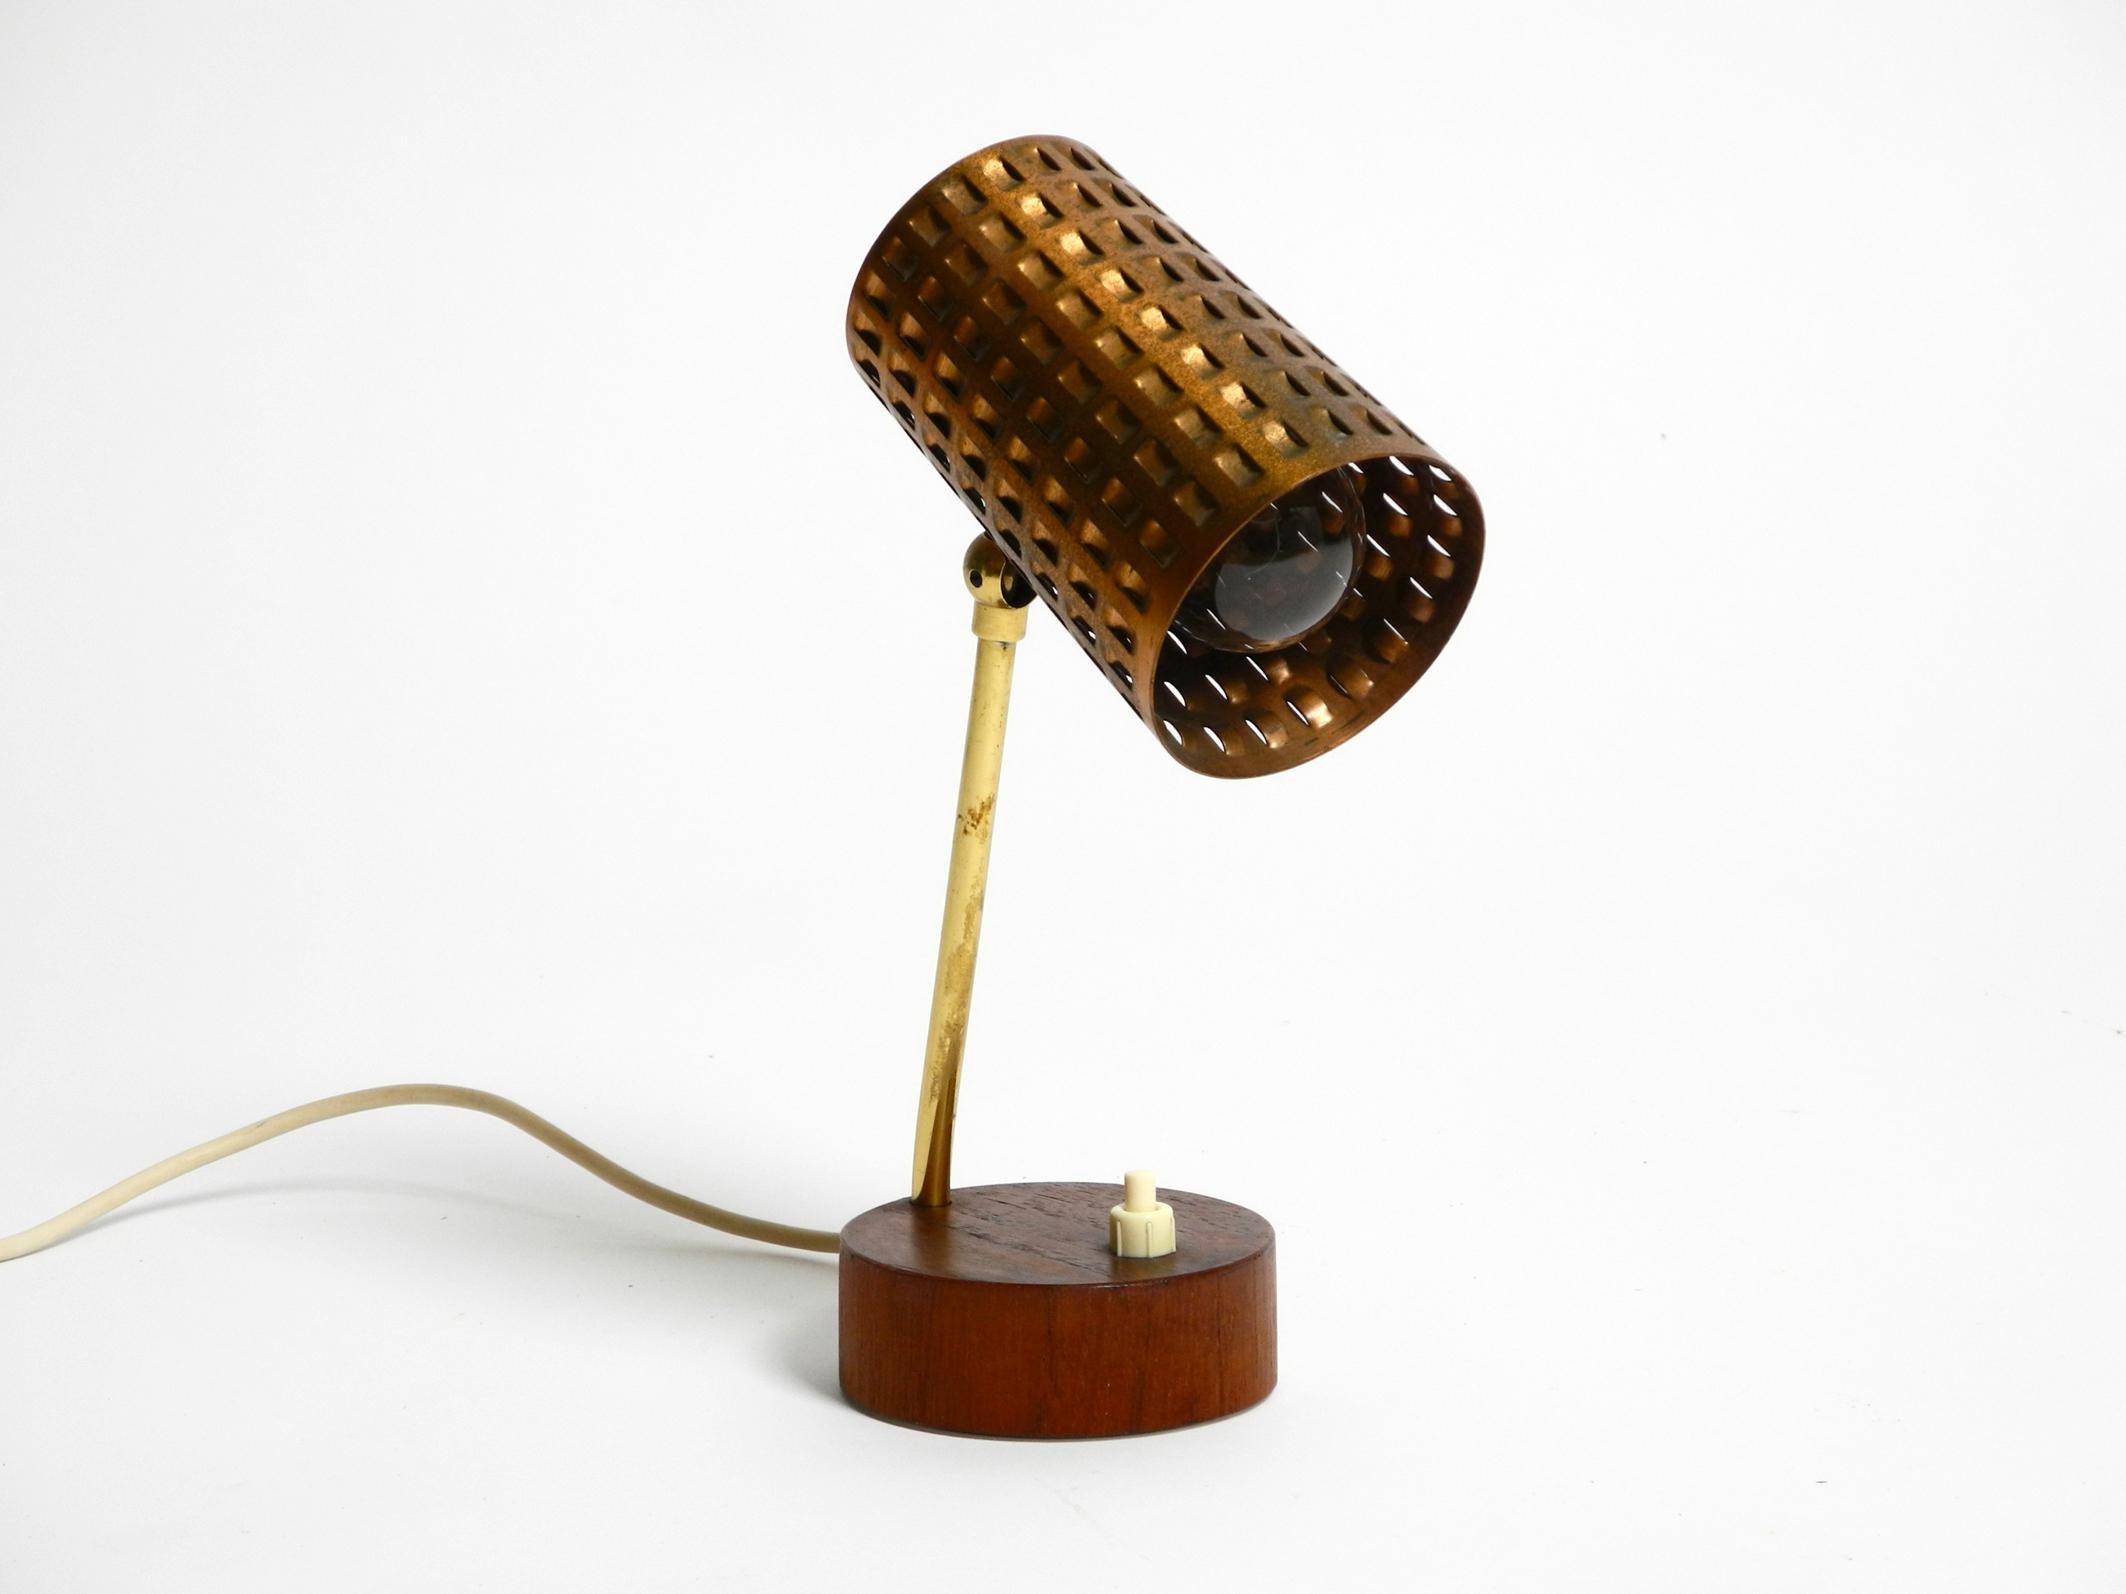 Rare, beautiful Mid Century Modern table lamp with perforated sheet shade made of copper, neck is made of brass. Base is with teak veneer.
Very nice design from the 1950s with great patina.
The shade can be steplessly adjusted up and down and stays